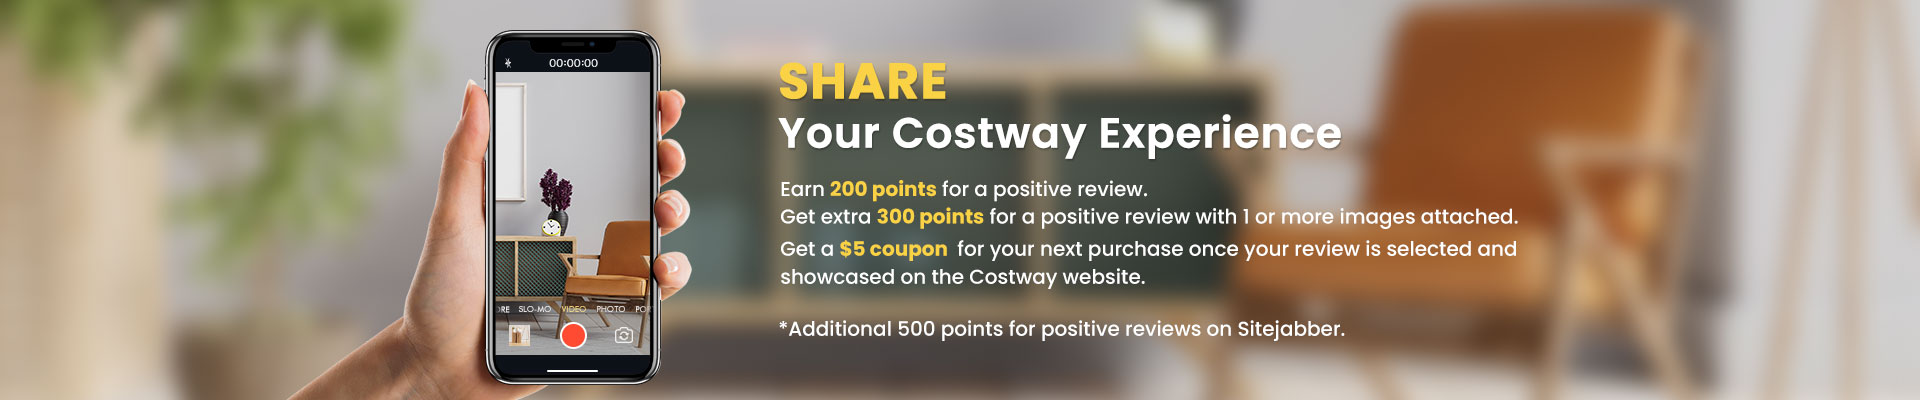 Share your costway Experience